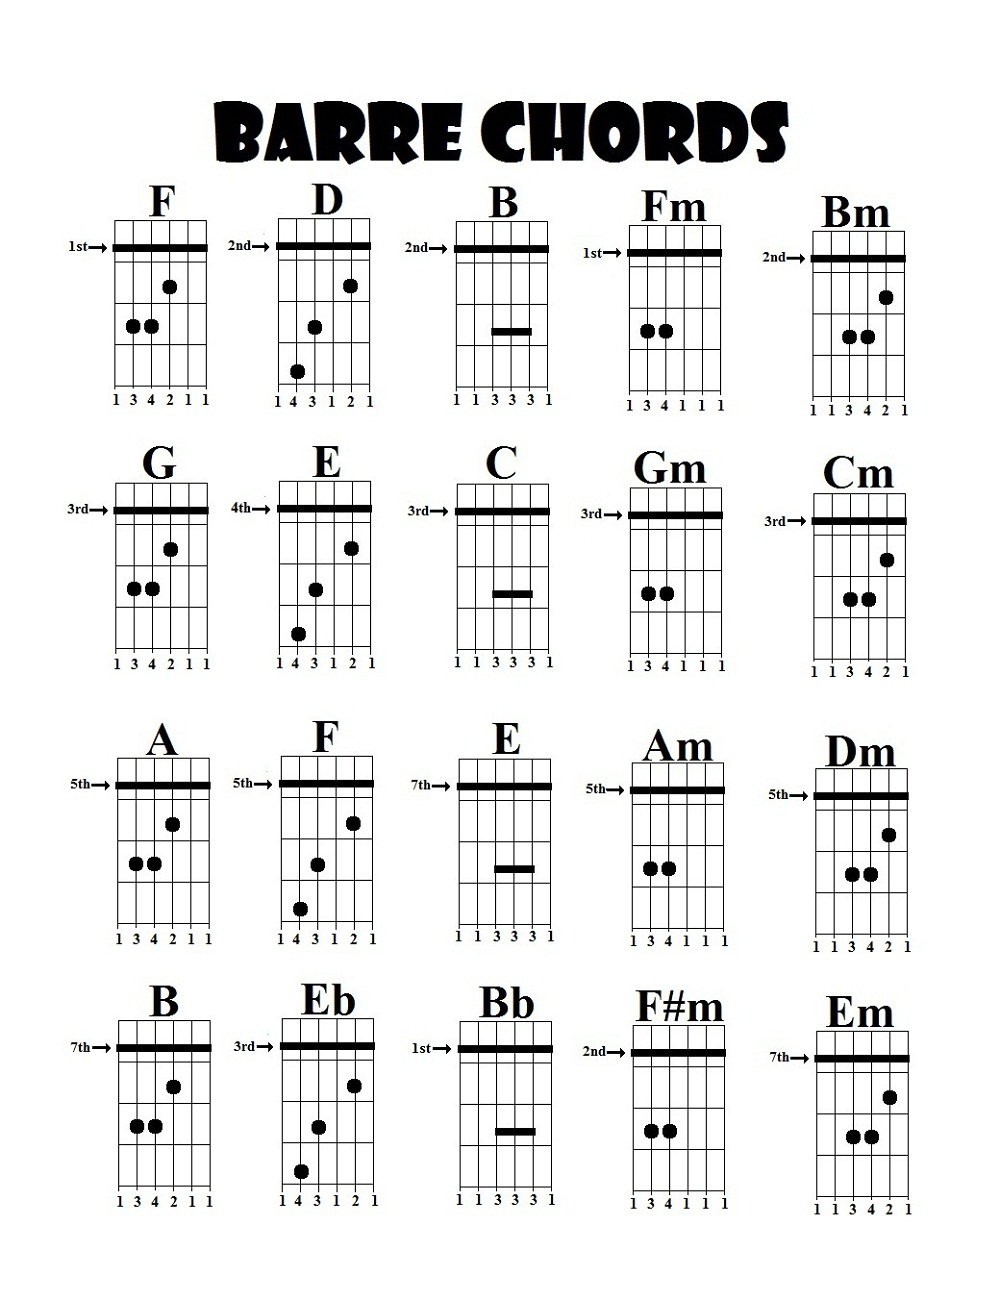 Guitar chords chart suited for beginners who are in the first steps of lear...